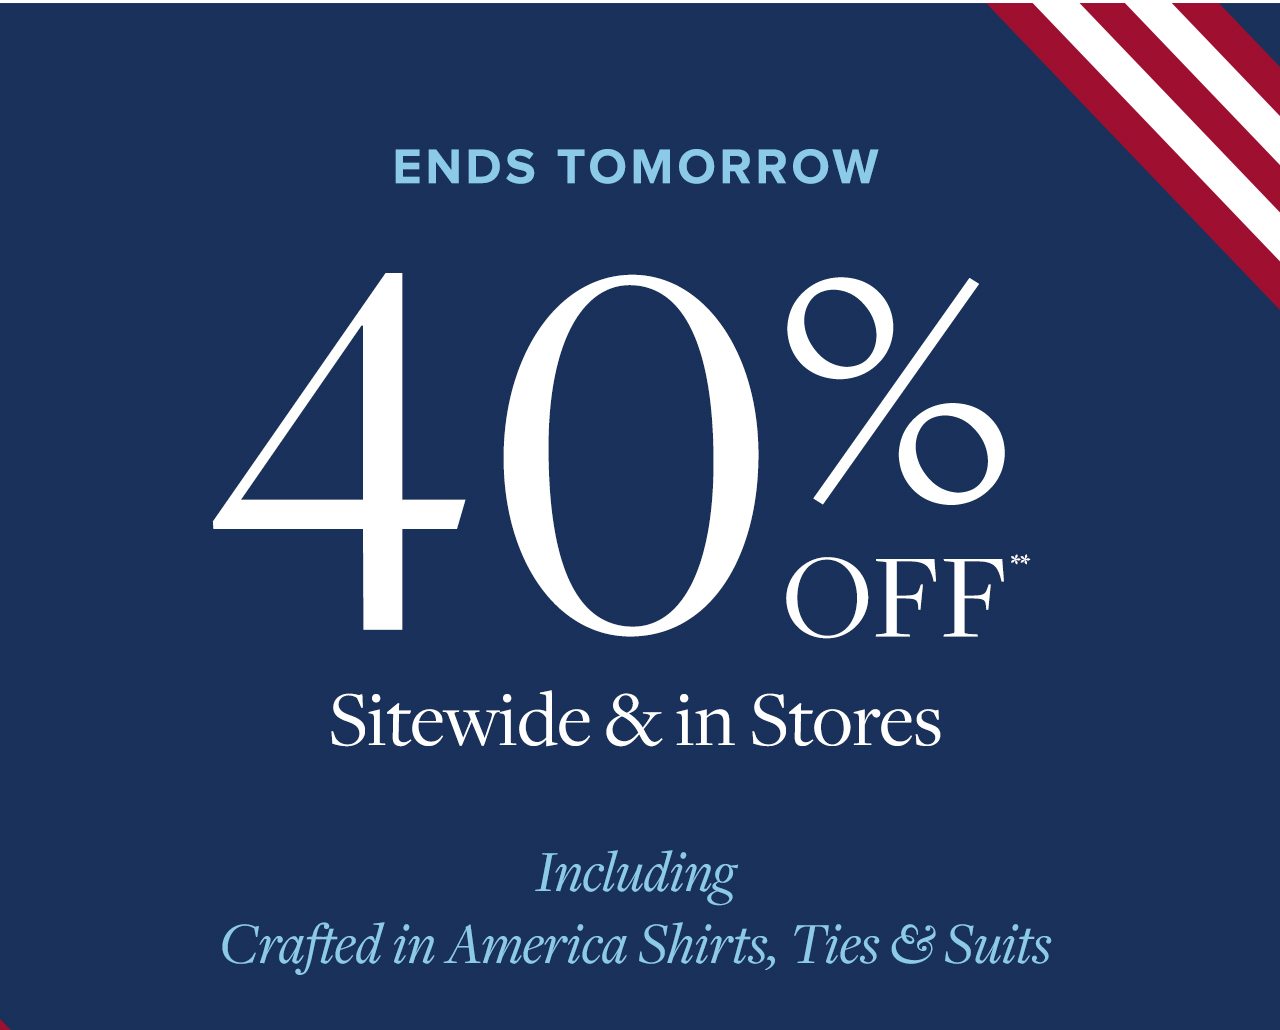 Ends Tomorrow 40% Off Sitewide and in Stores Including Crafted in America Shirts, Ties and Suits